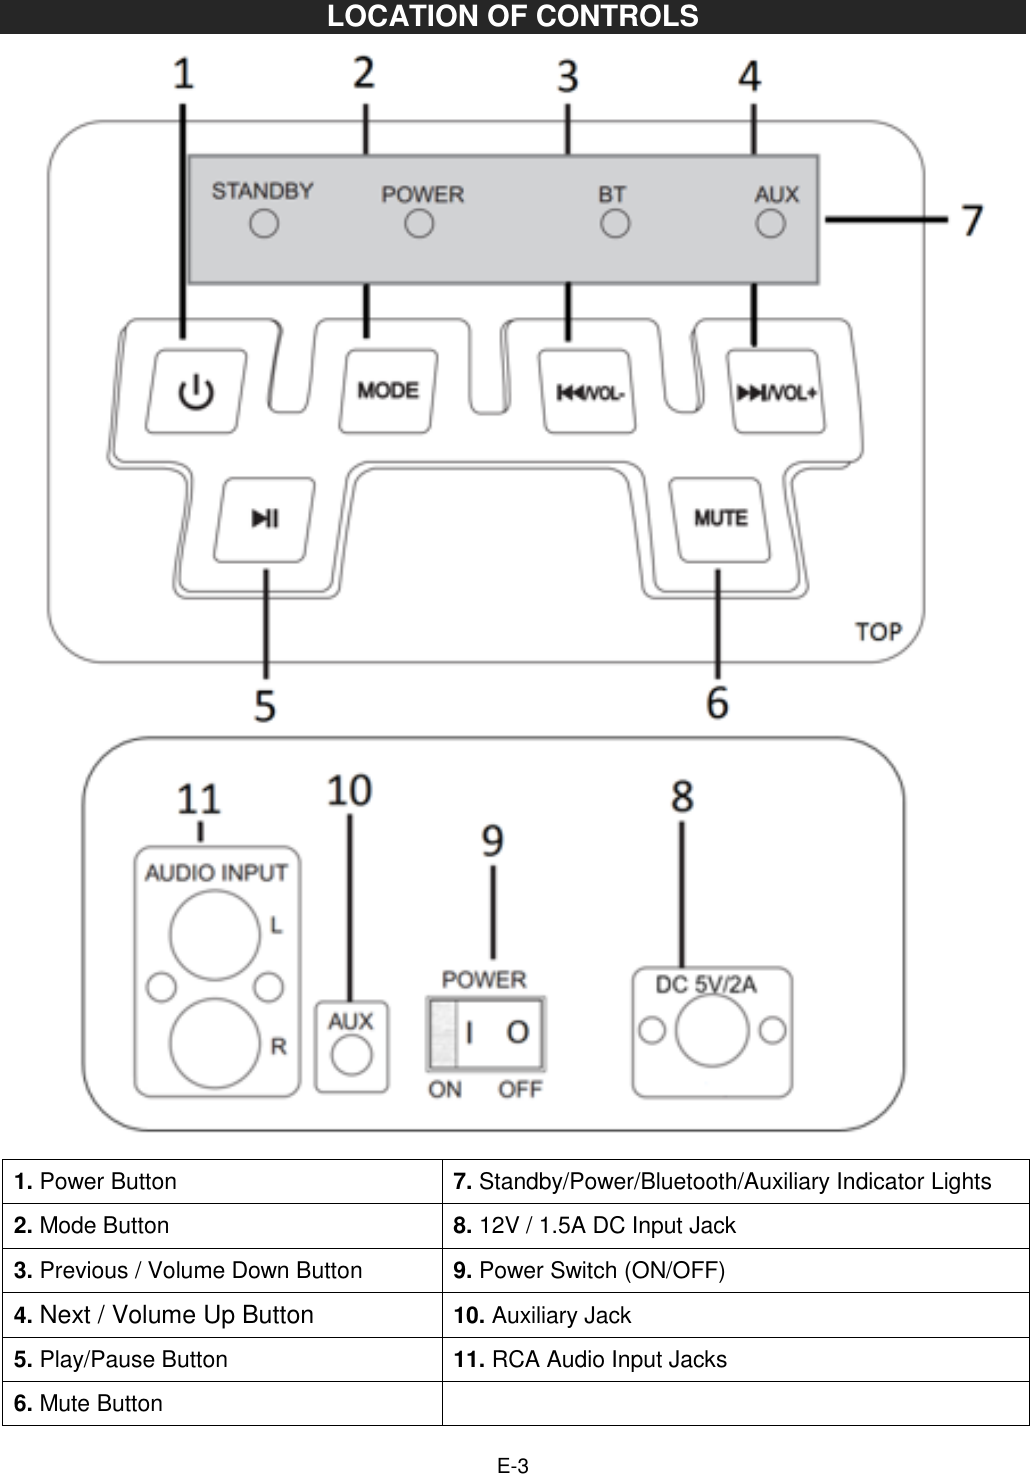   E-3 LOCATION OF CONTROLS  1. Power Button 7. Standby/Power/Bluetooth/Auxiliary Indicator Lights 2. Mode Button  8. 12V / 1.5A DC Input Jack 3. Previous / Volume Down Button 9. Power Switch (ON/OFF) 4. Next / Volume Up Button 10. Auxiliary Jack 5. Play/Pause Button                       11. RCA Audio Input Jacks 6. Mute Button     